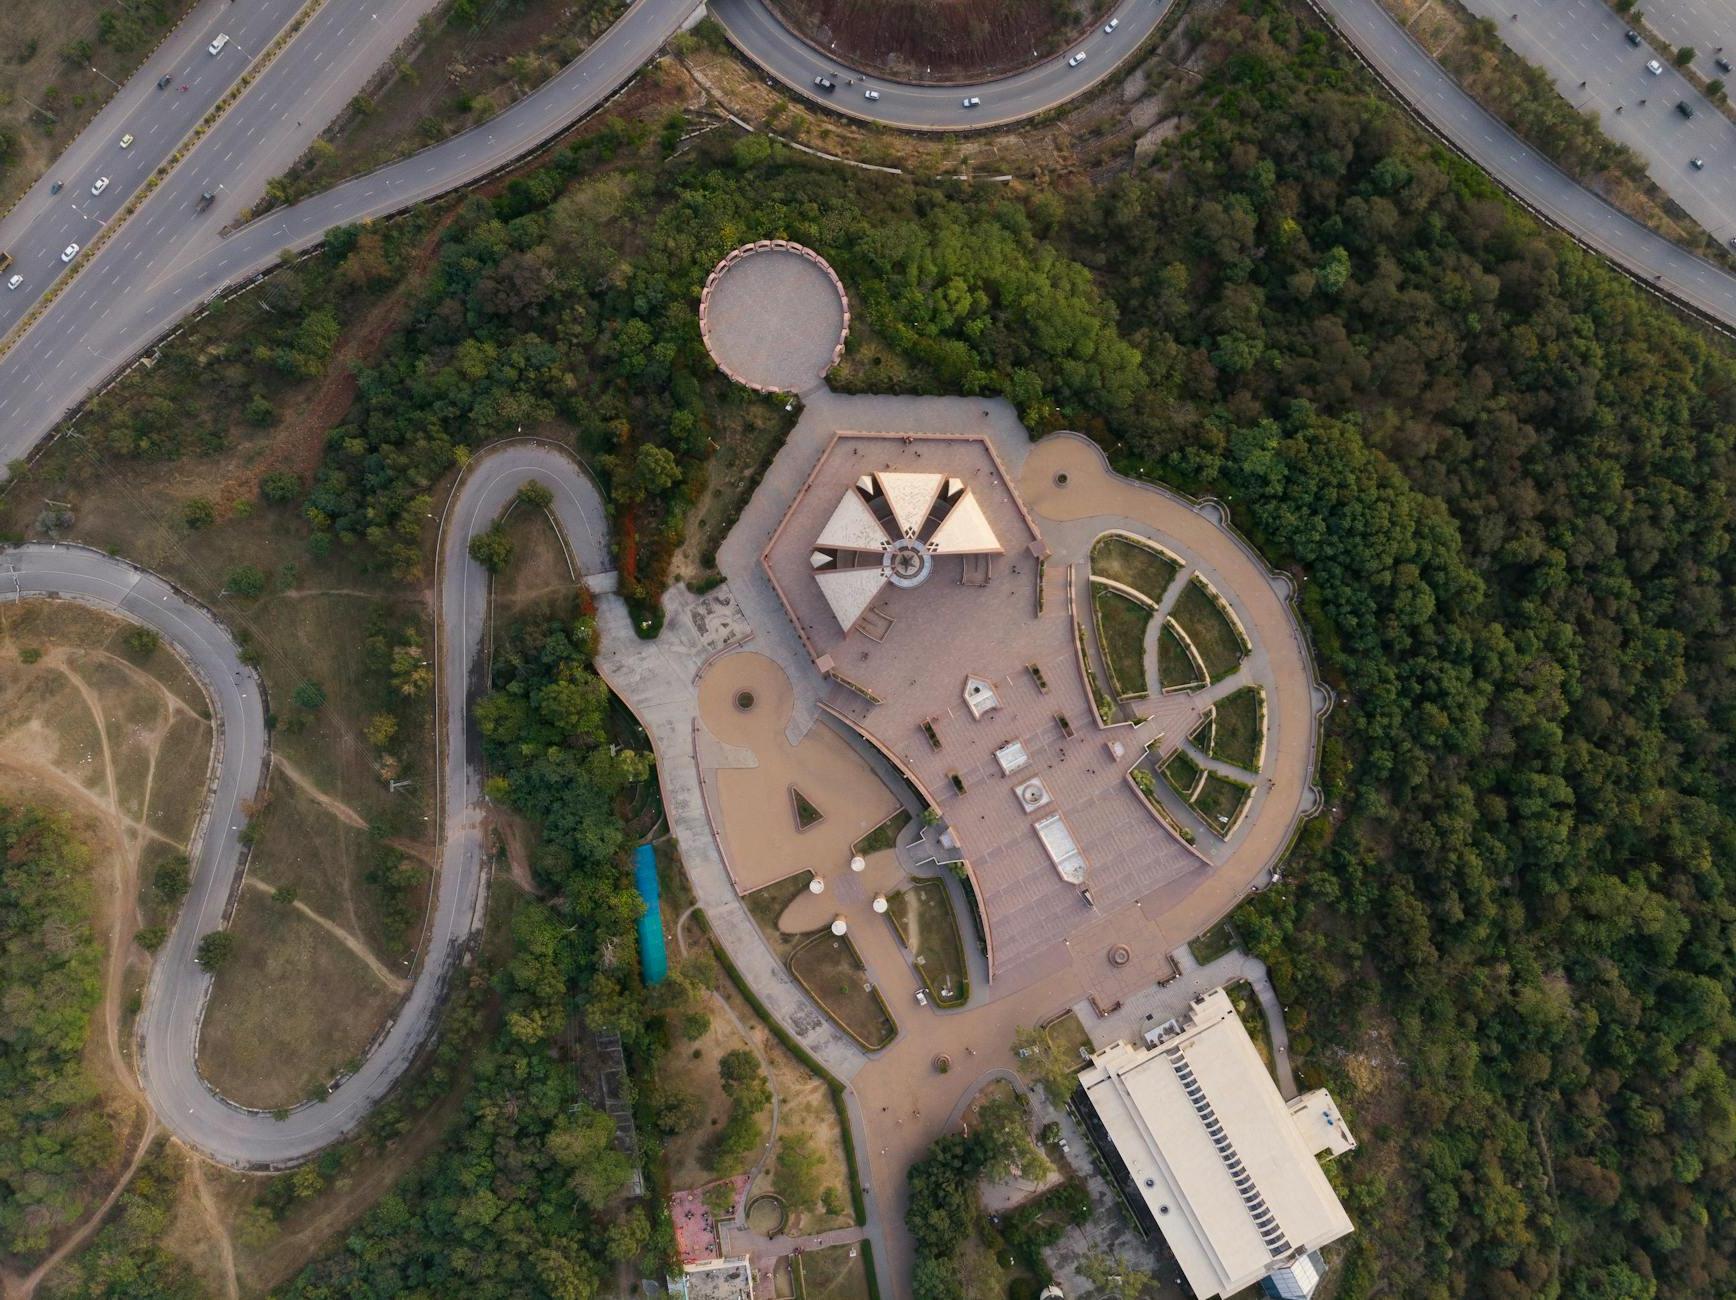 Top View of Facility Surrounded by Trees